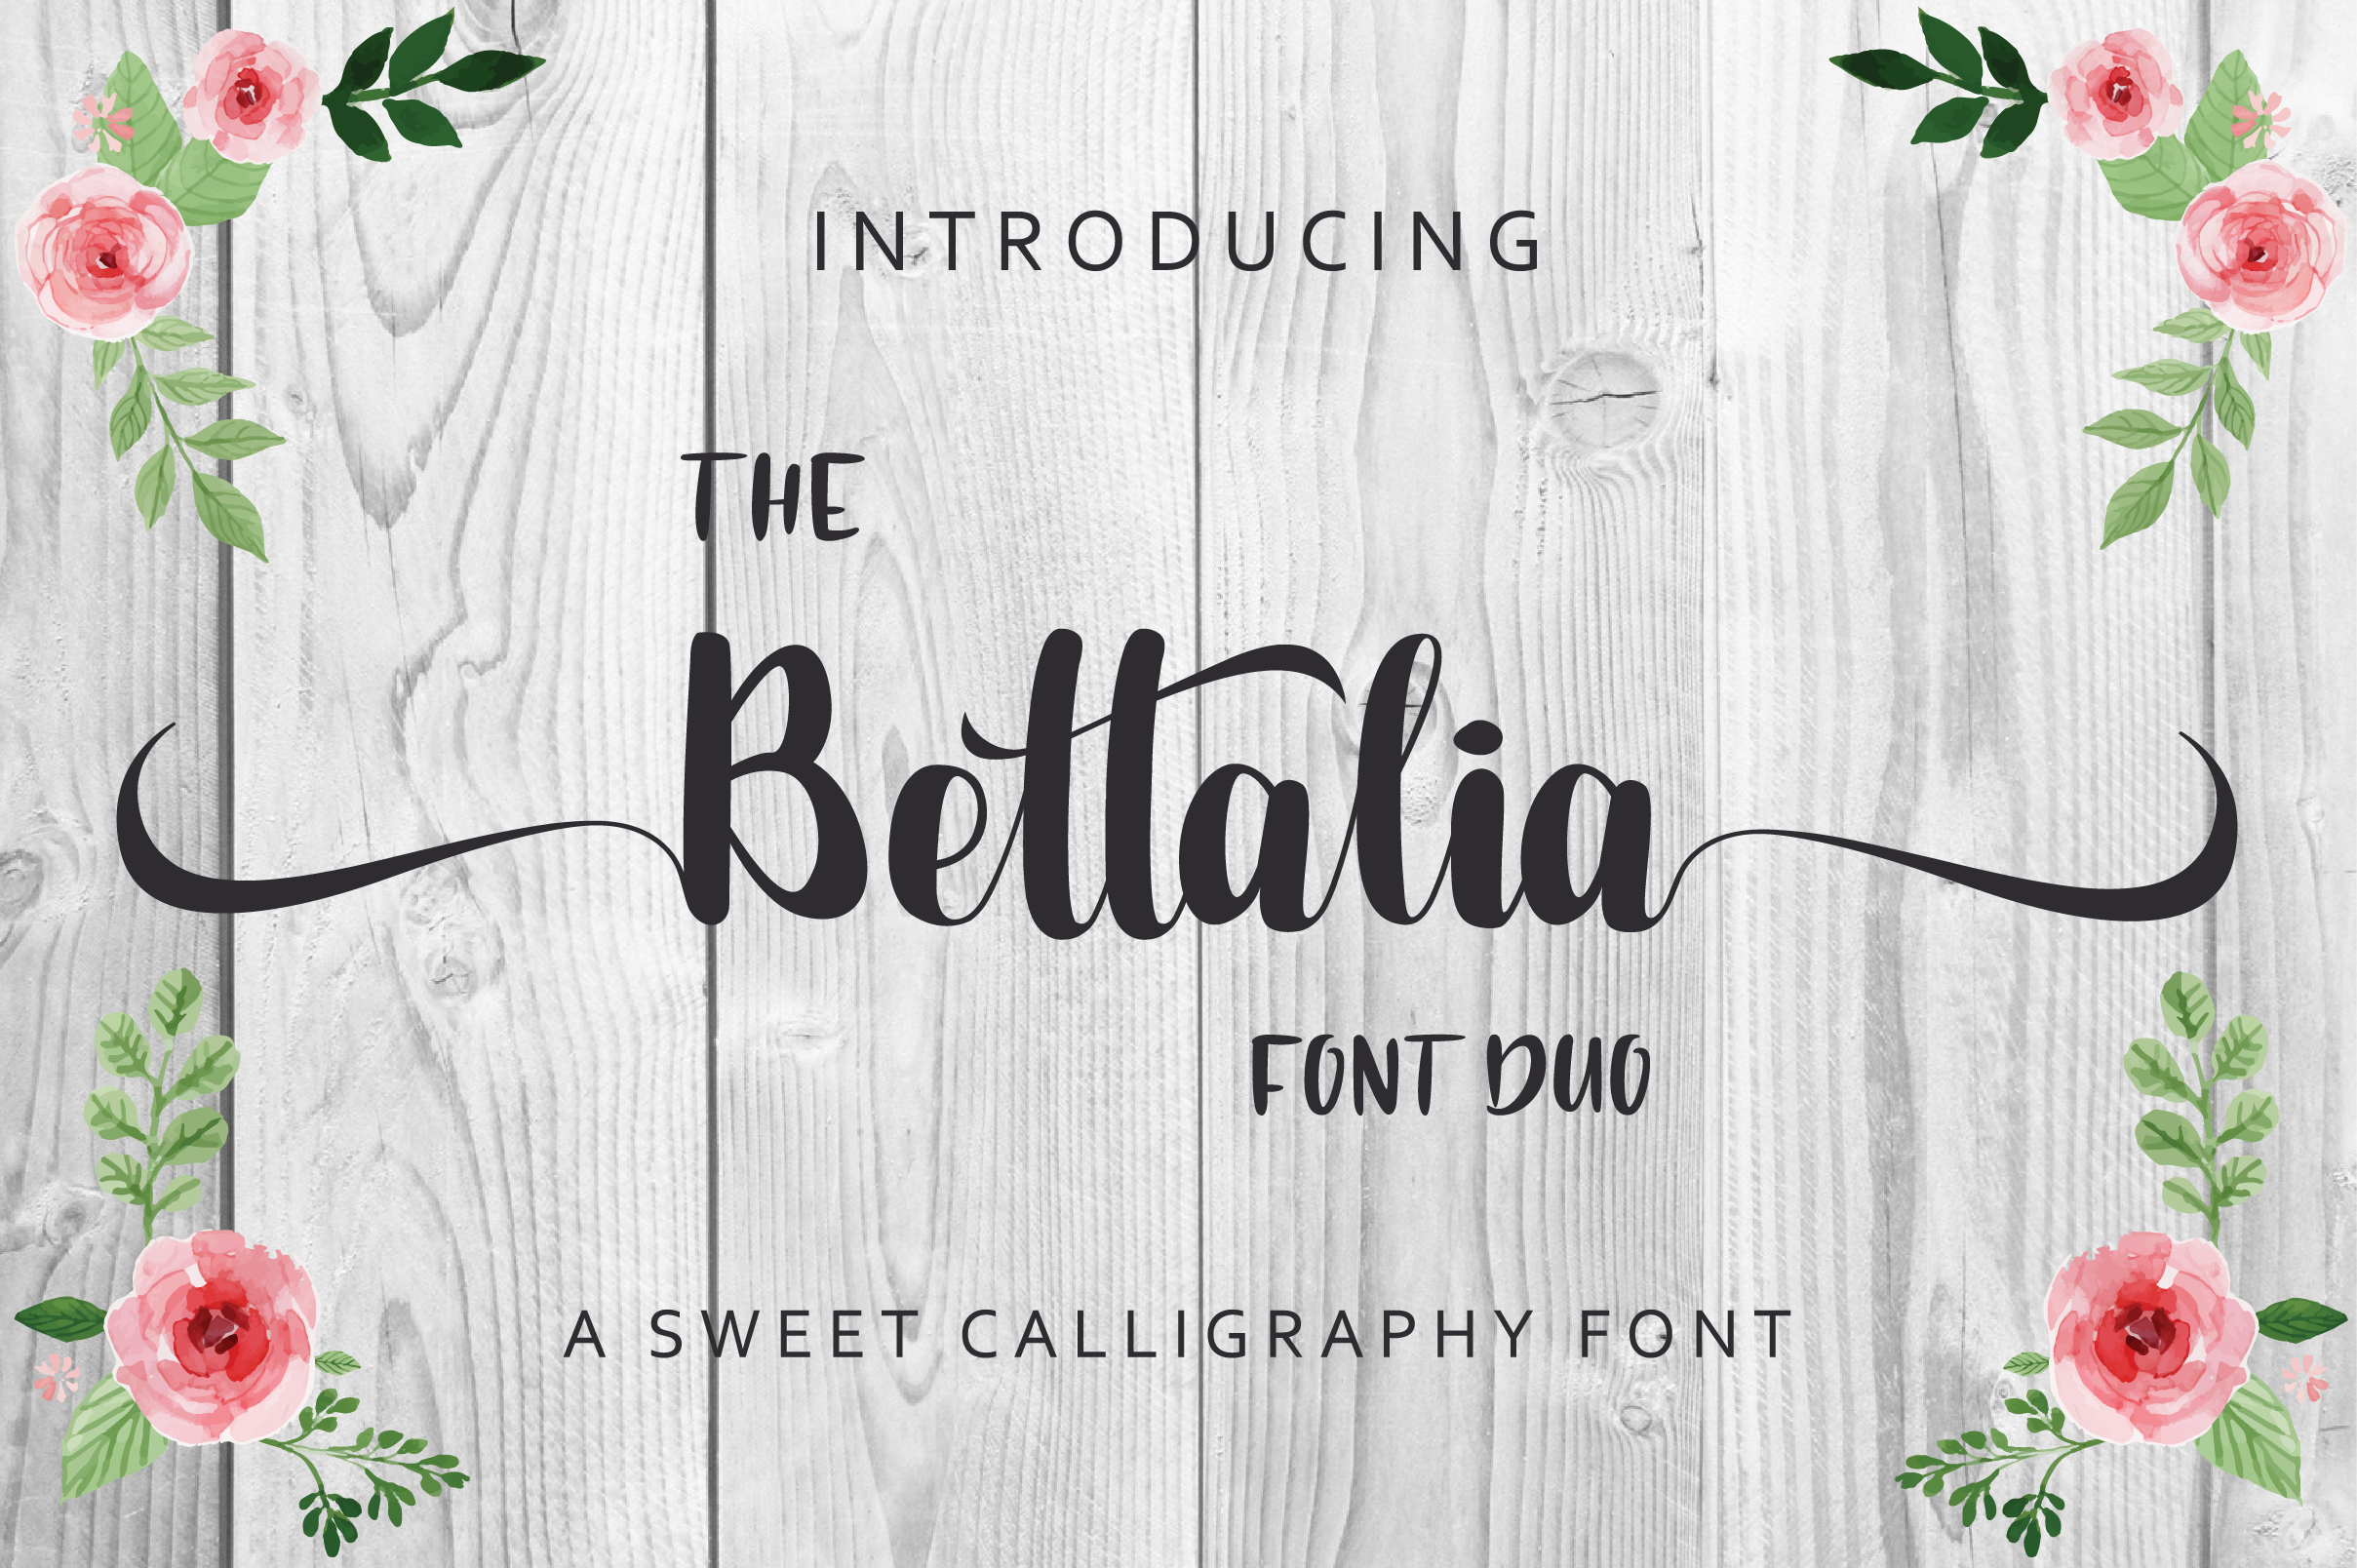 The Bettalia Font Duo插图